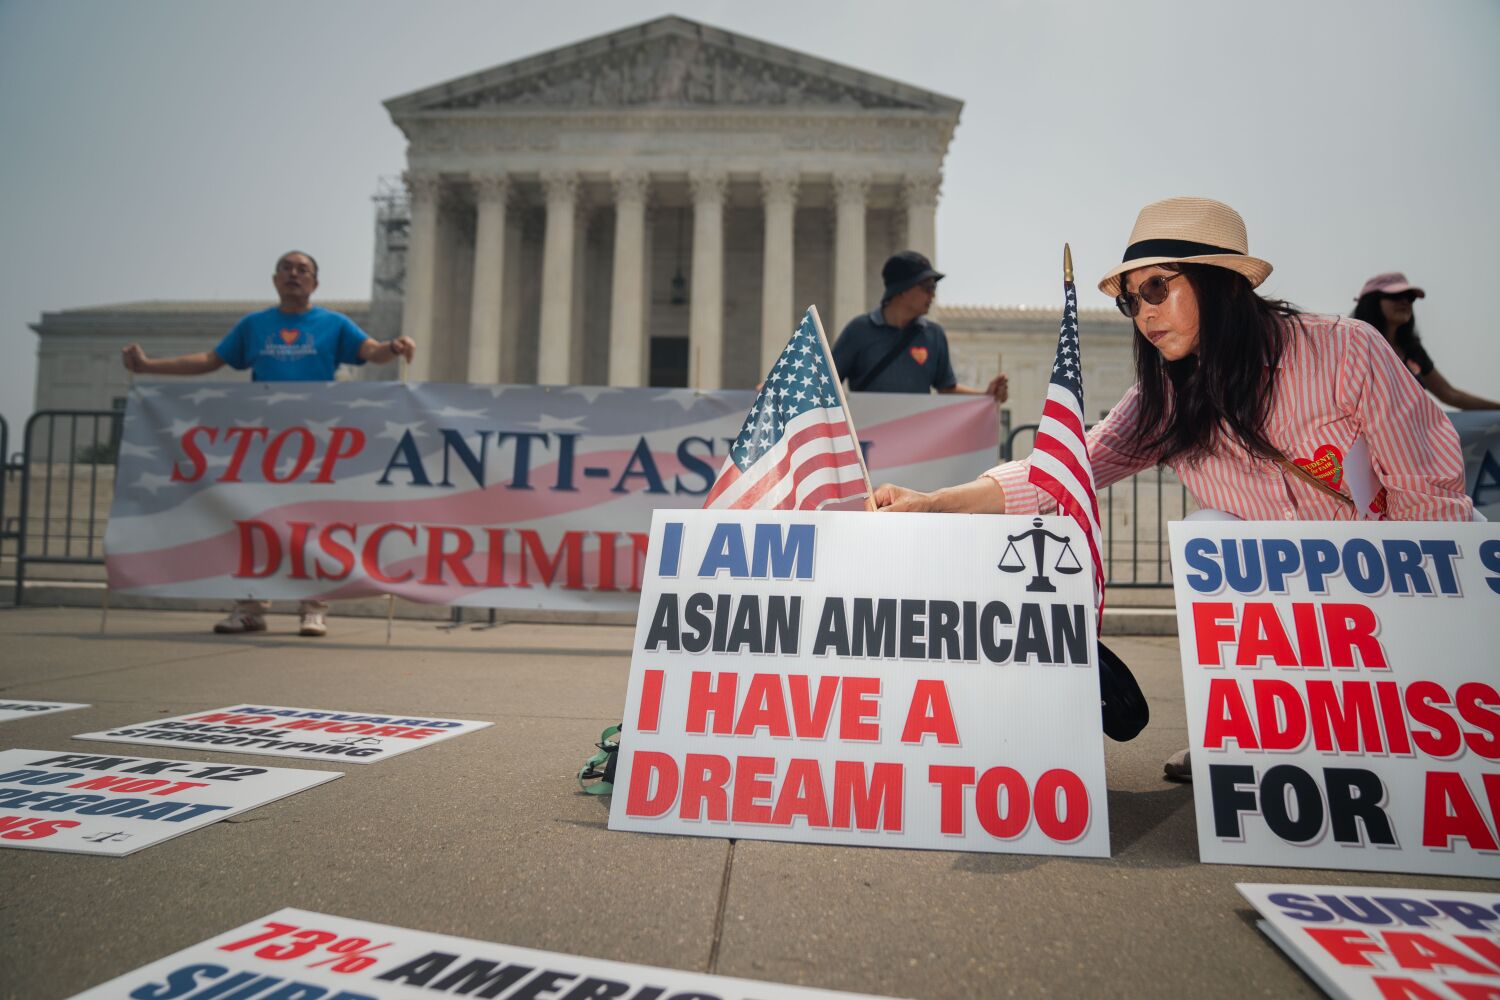 A question for Asian Americans celebrating affirmative action's end: What have we won?